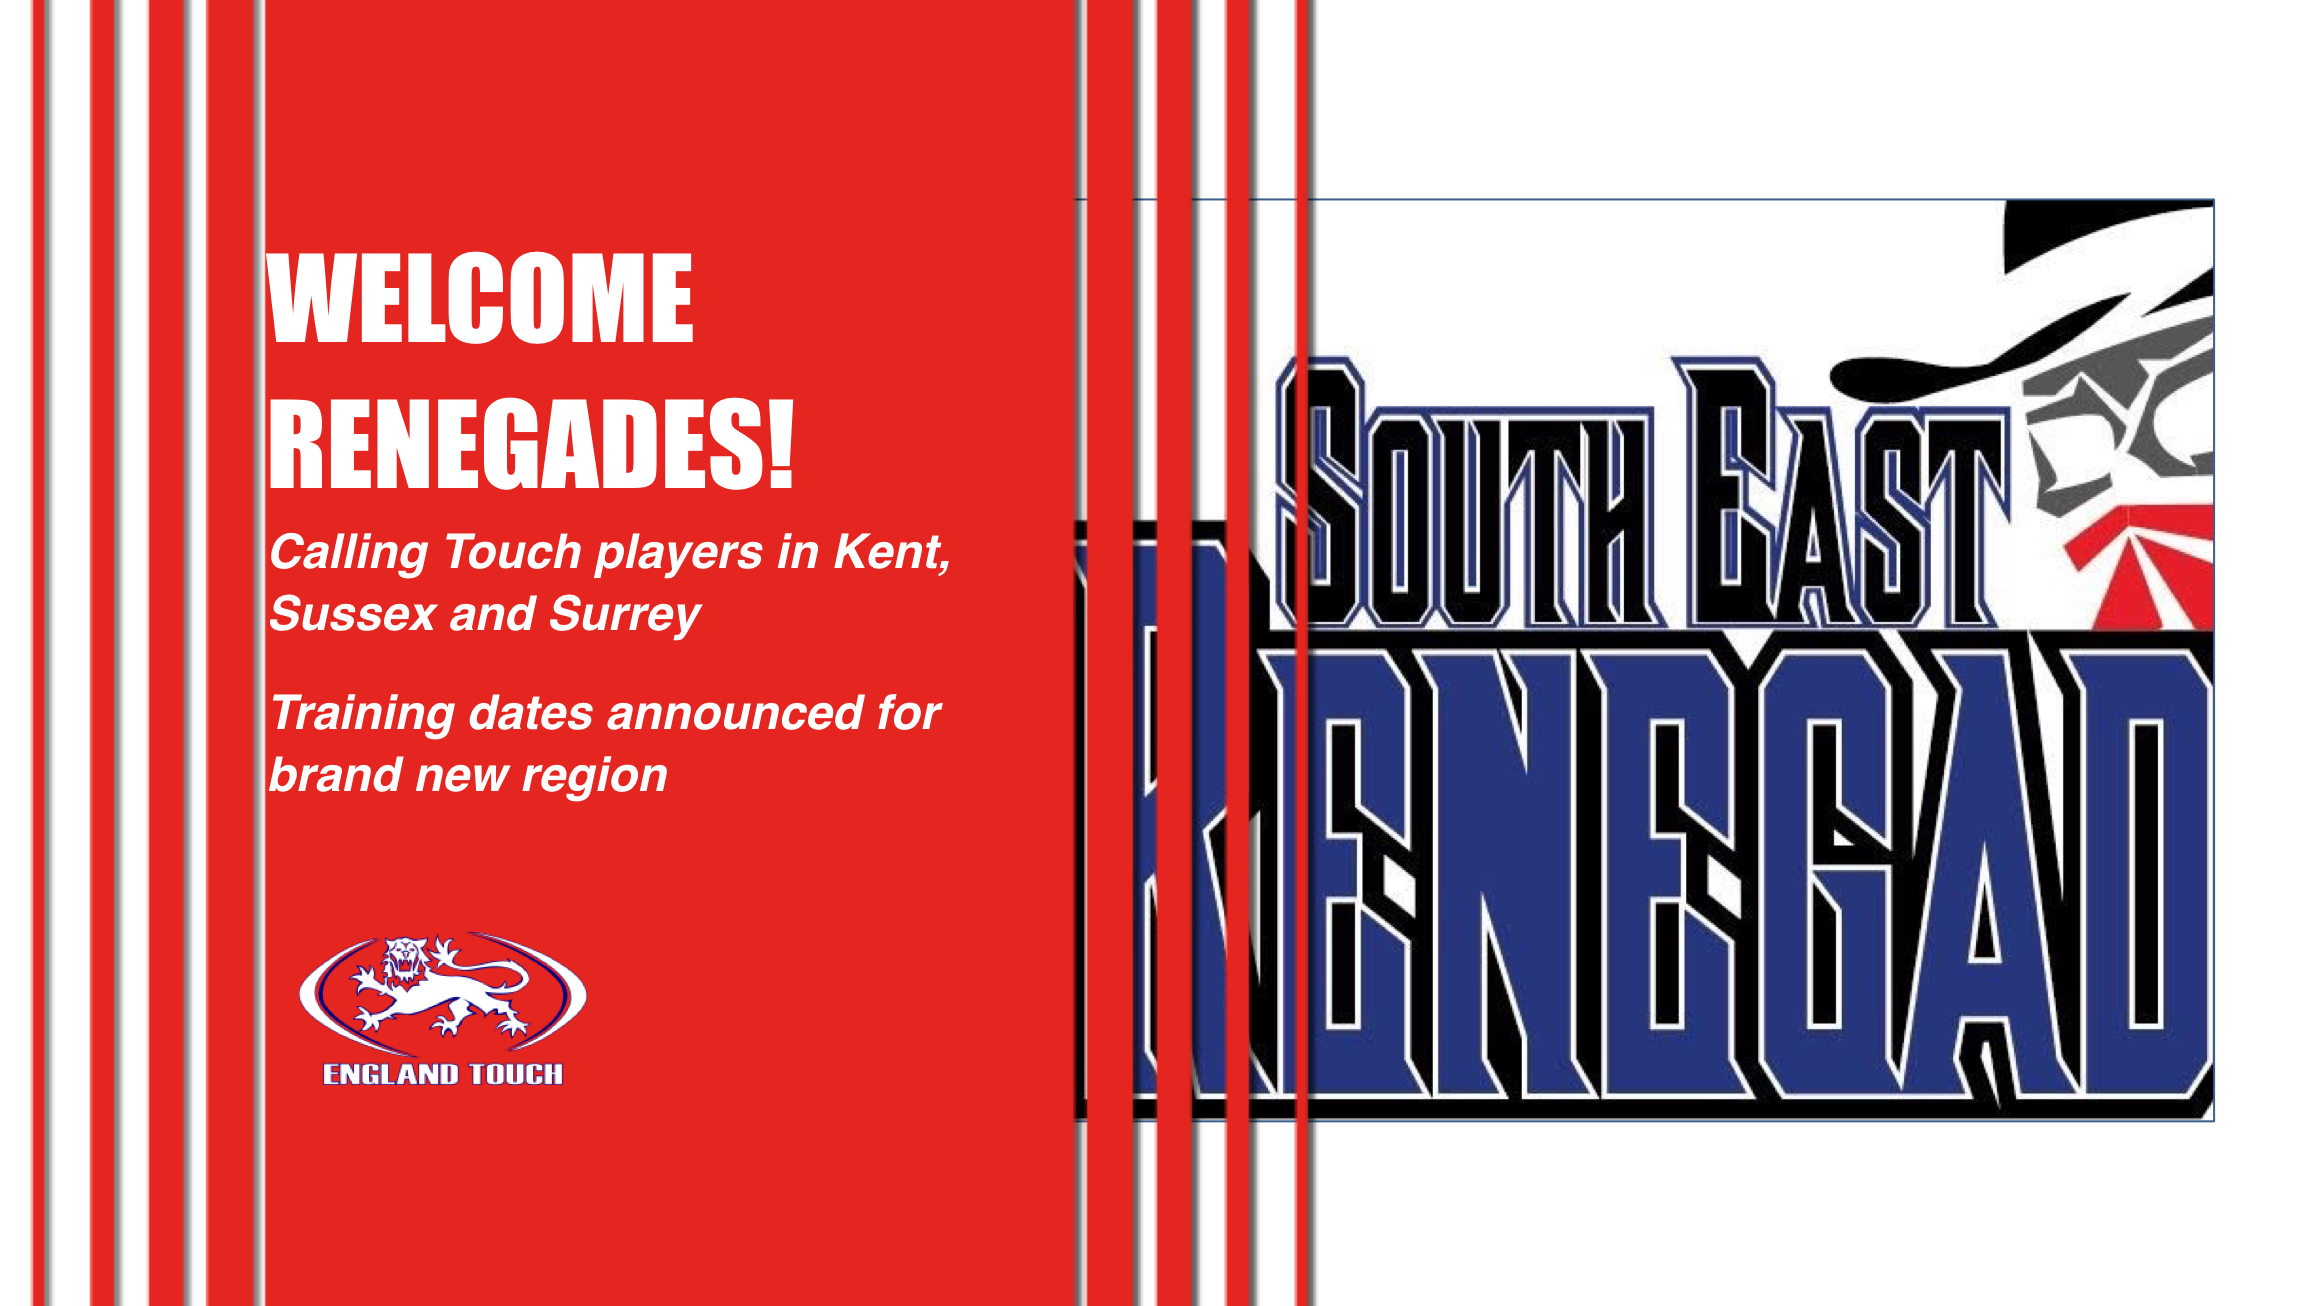 South-East Renegades - new region training sessions announced